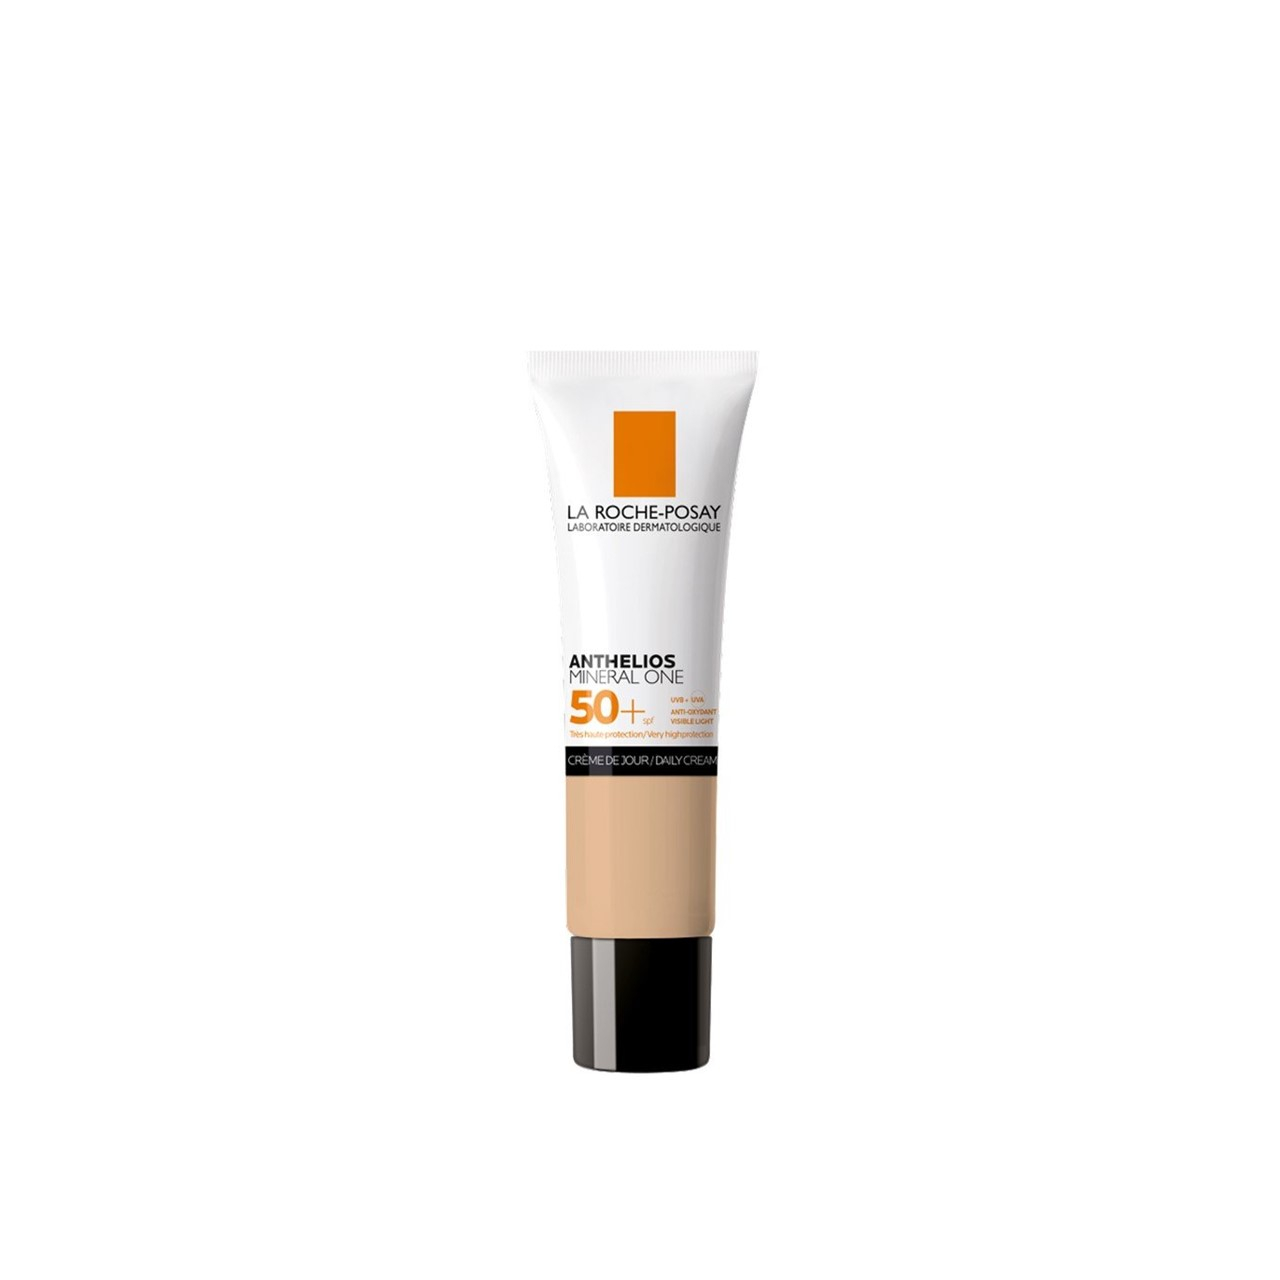 La Roche-Posay Anthelios Mineral One SPF50+